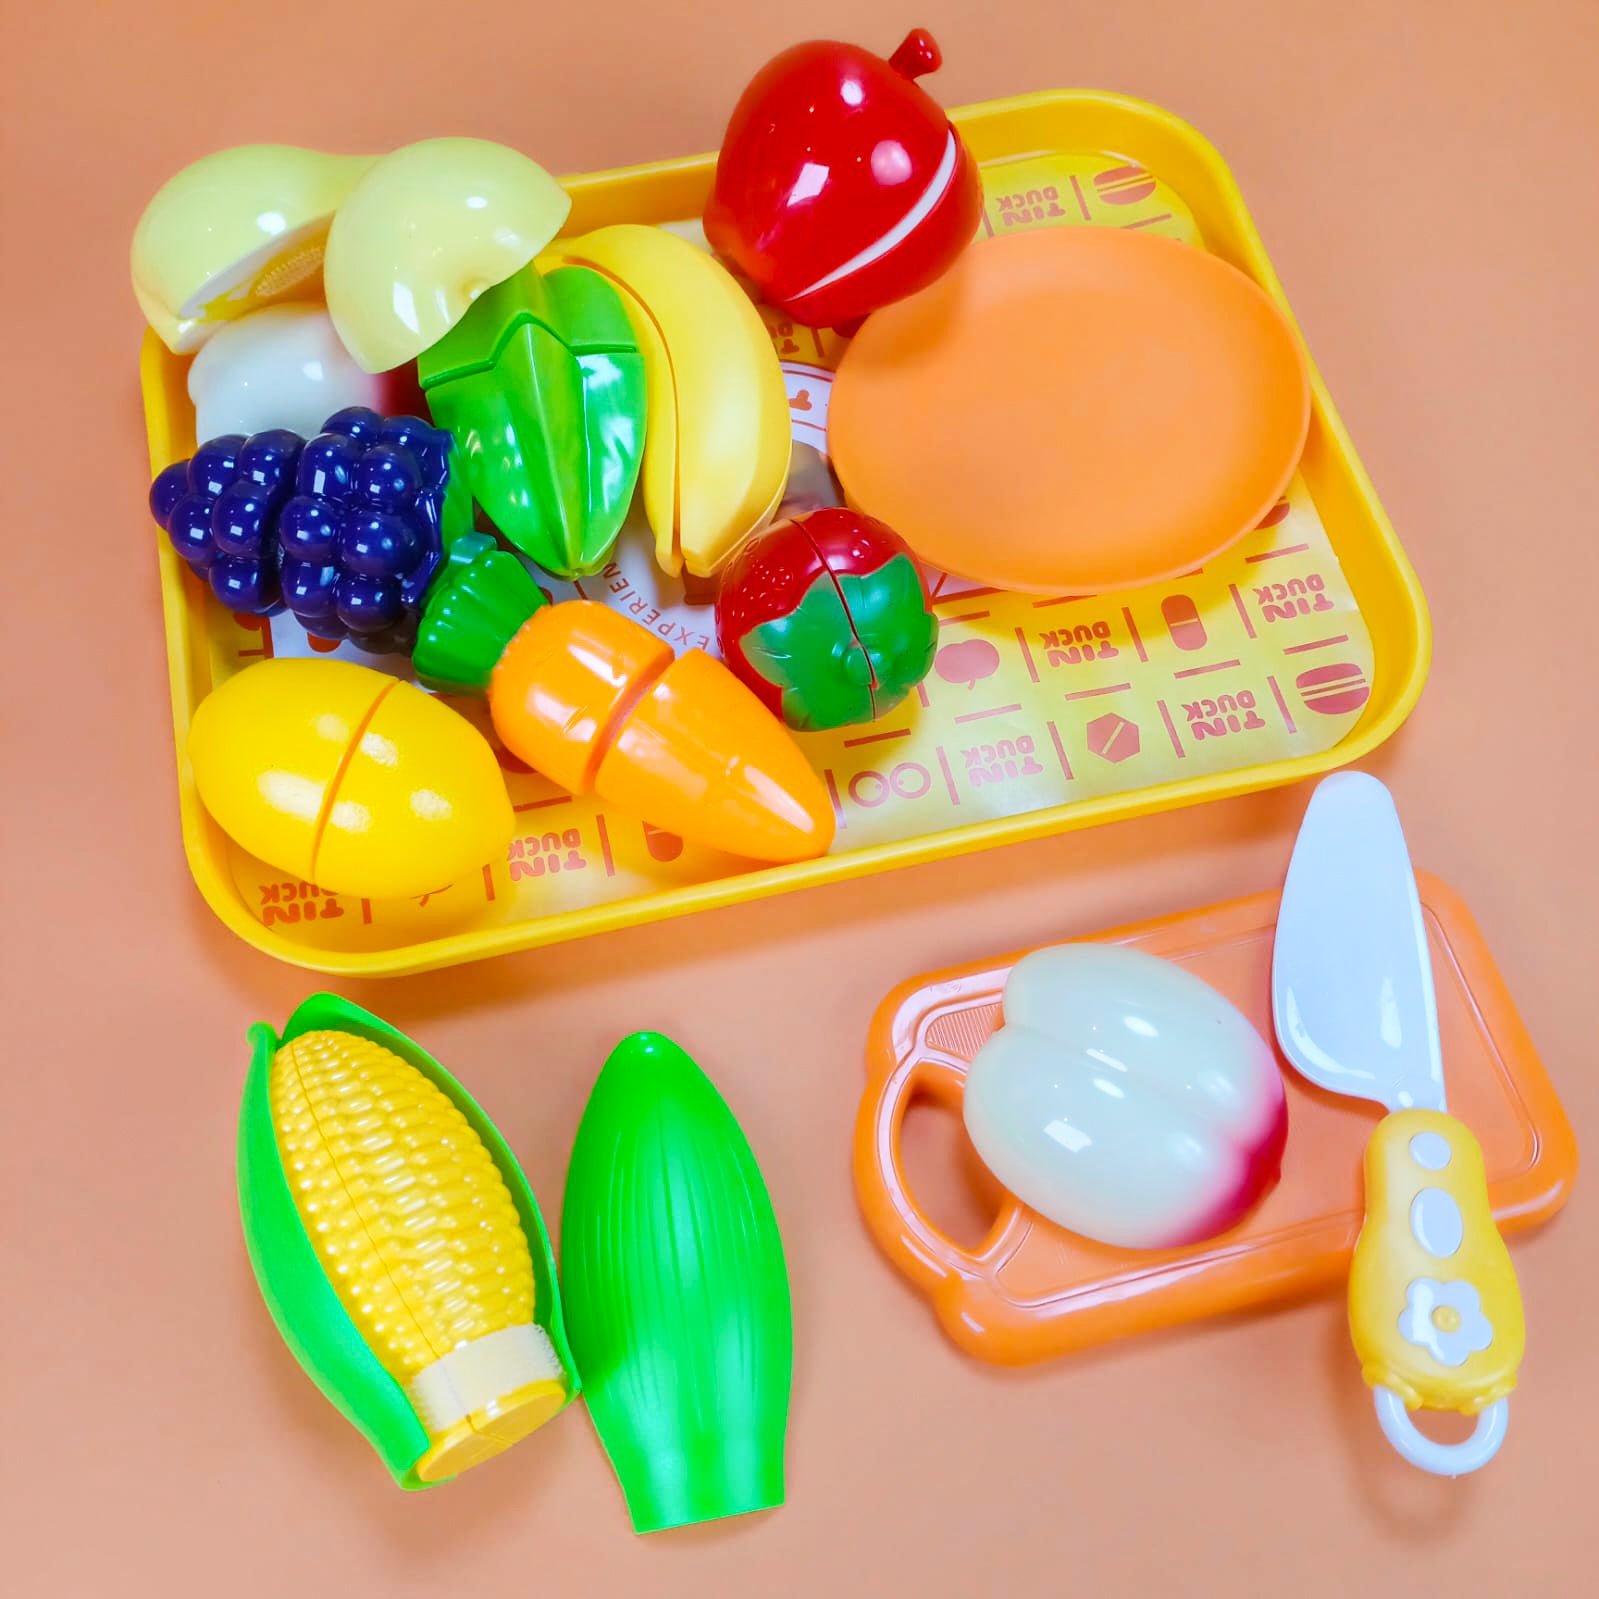 Vegetables and Fruit Cutting Kitchen Toy Set For Kids Early Learning & Education